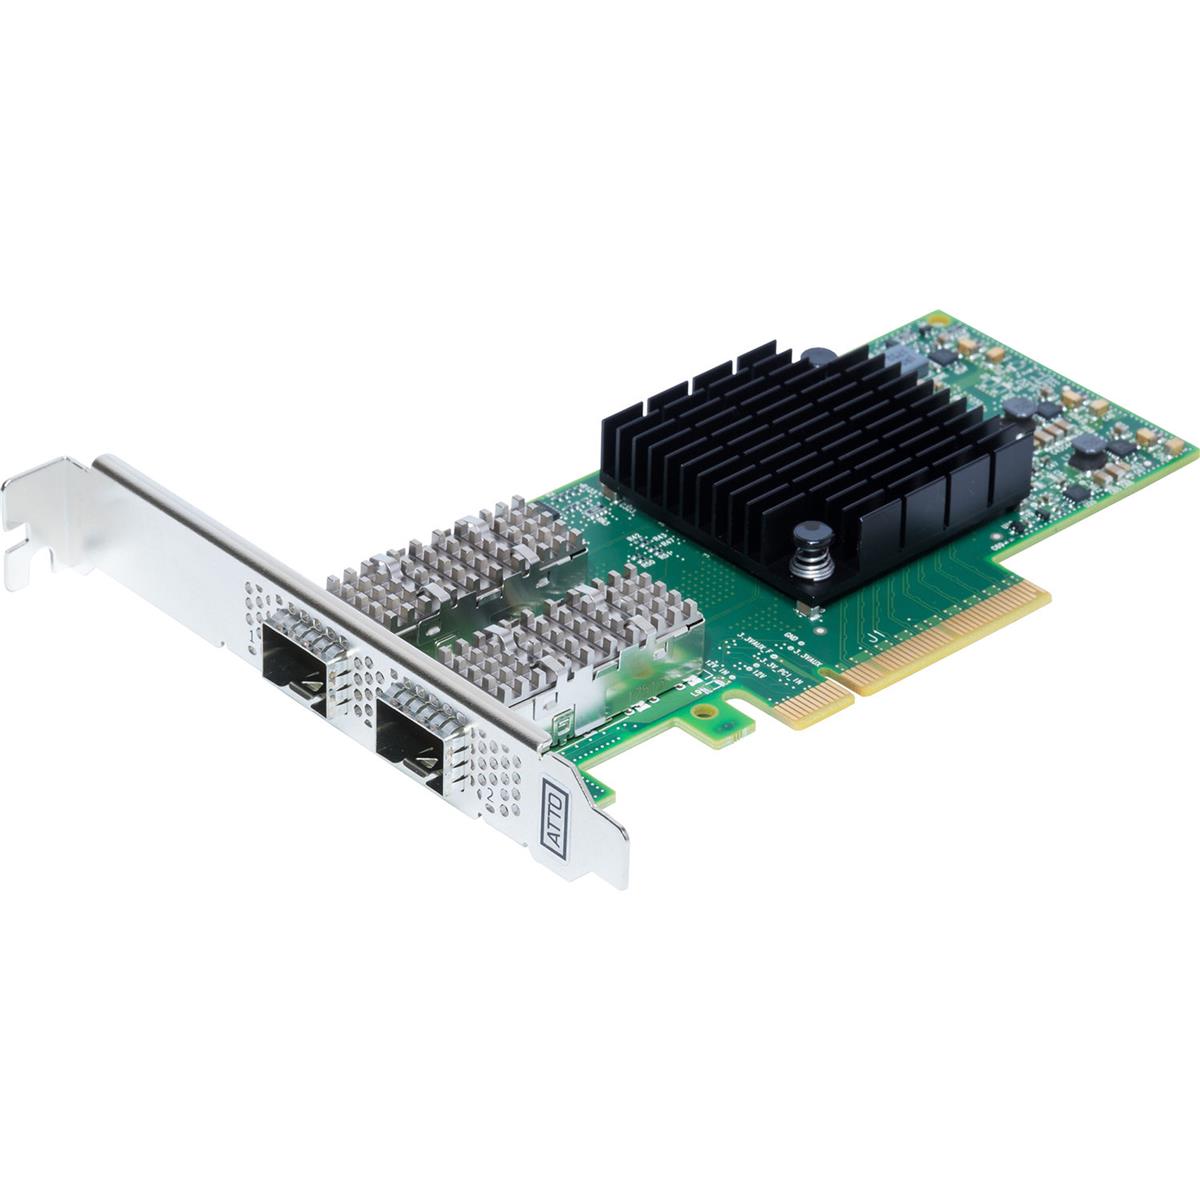 Image of ATTO Technology FastFrame N322 2-Ch 10/25GbE x16 PCIe 3.0 Network Adapter